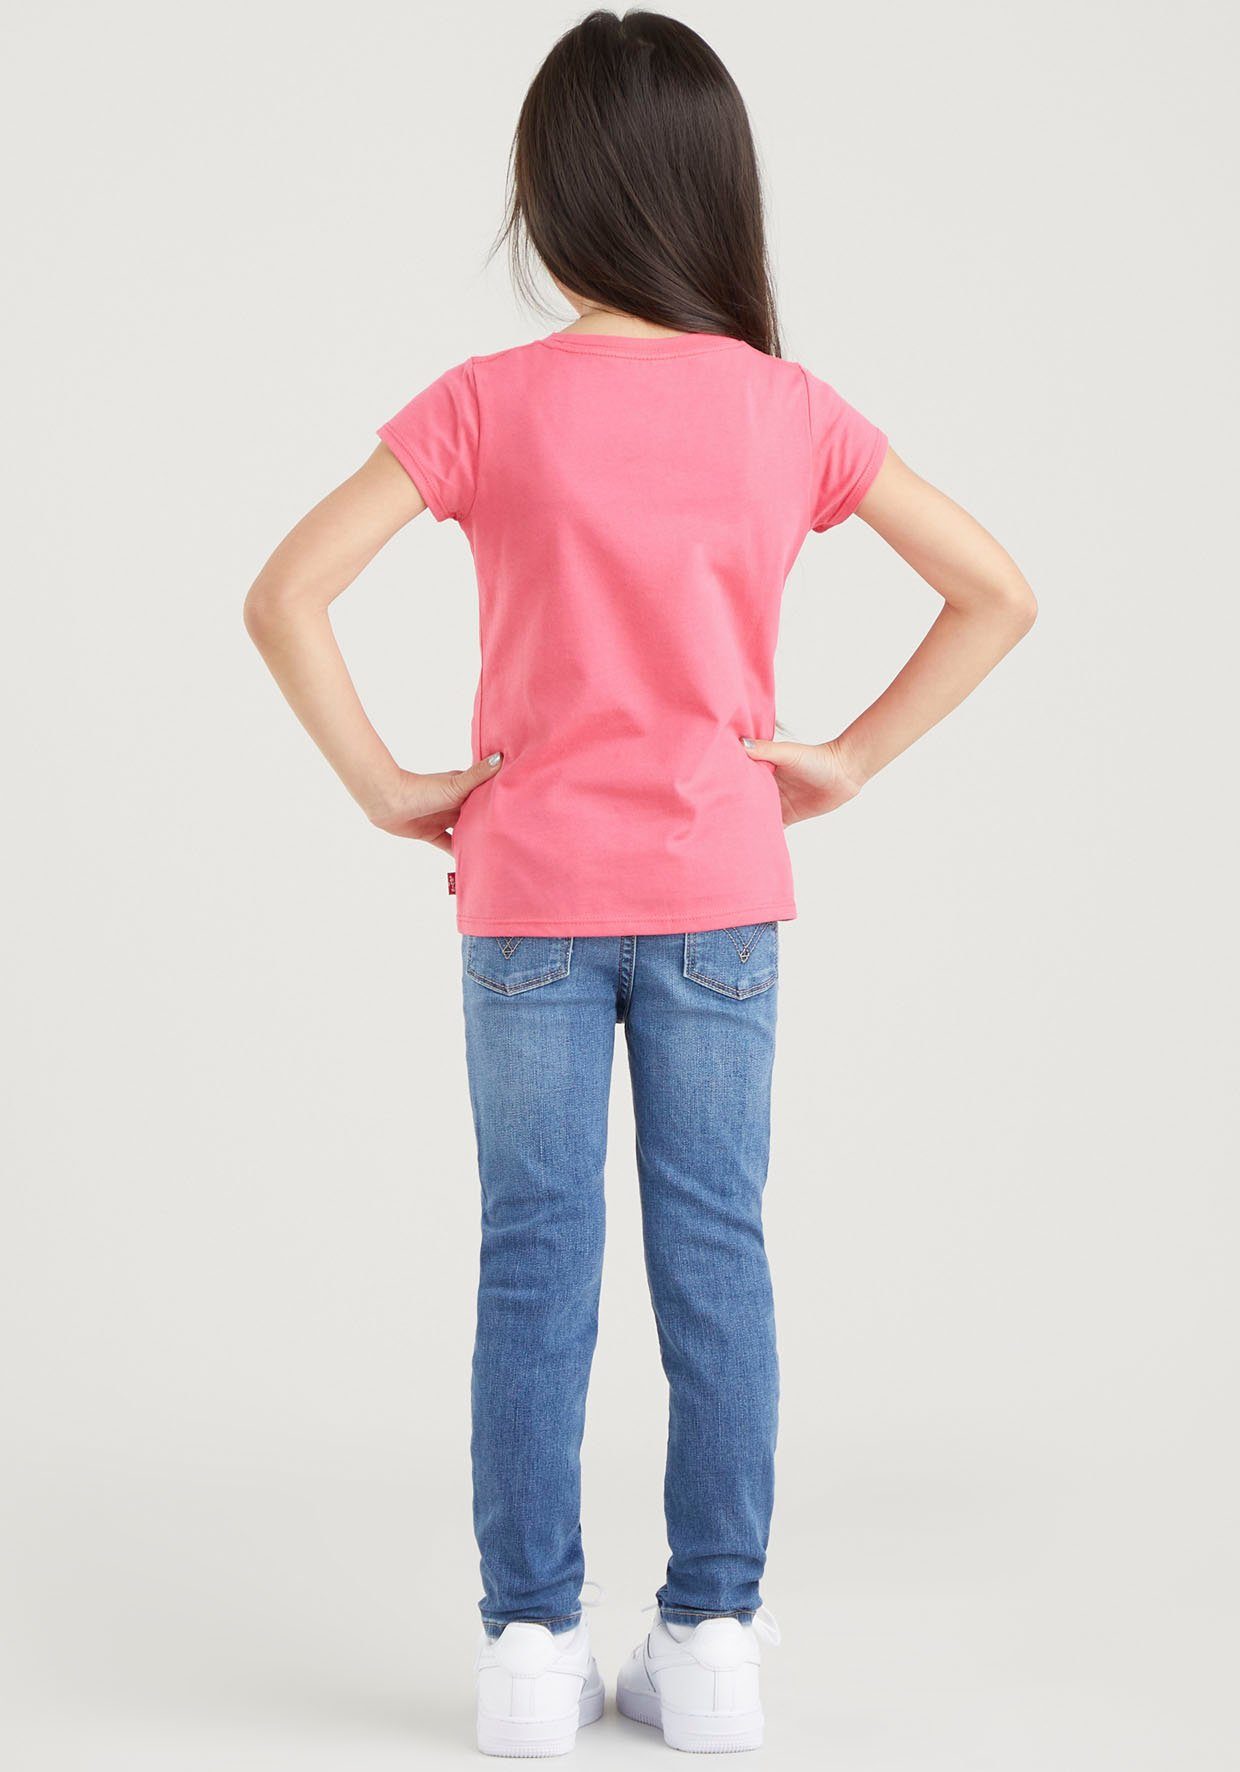 720™ blue GIRLS HIGH Stretch-Jeans used SKINNY for Levi's® mid SUPER RISE Kids